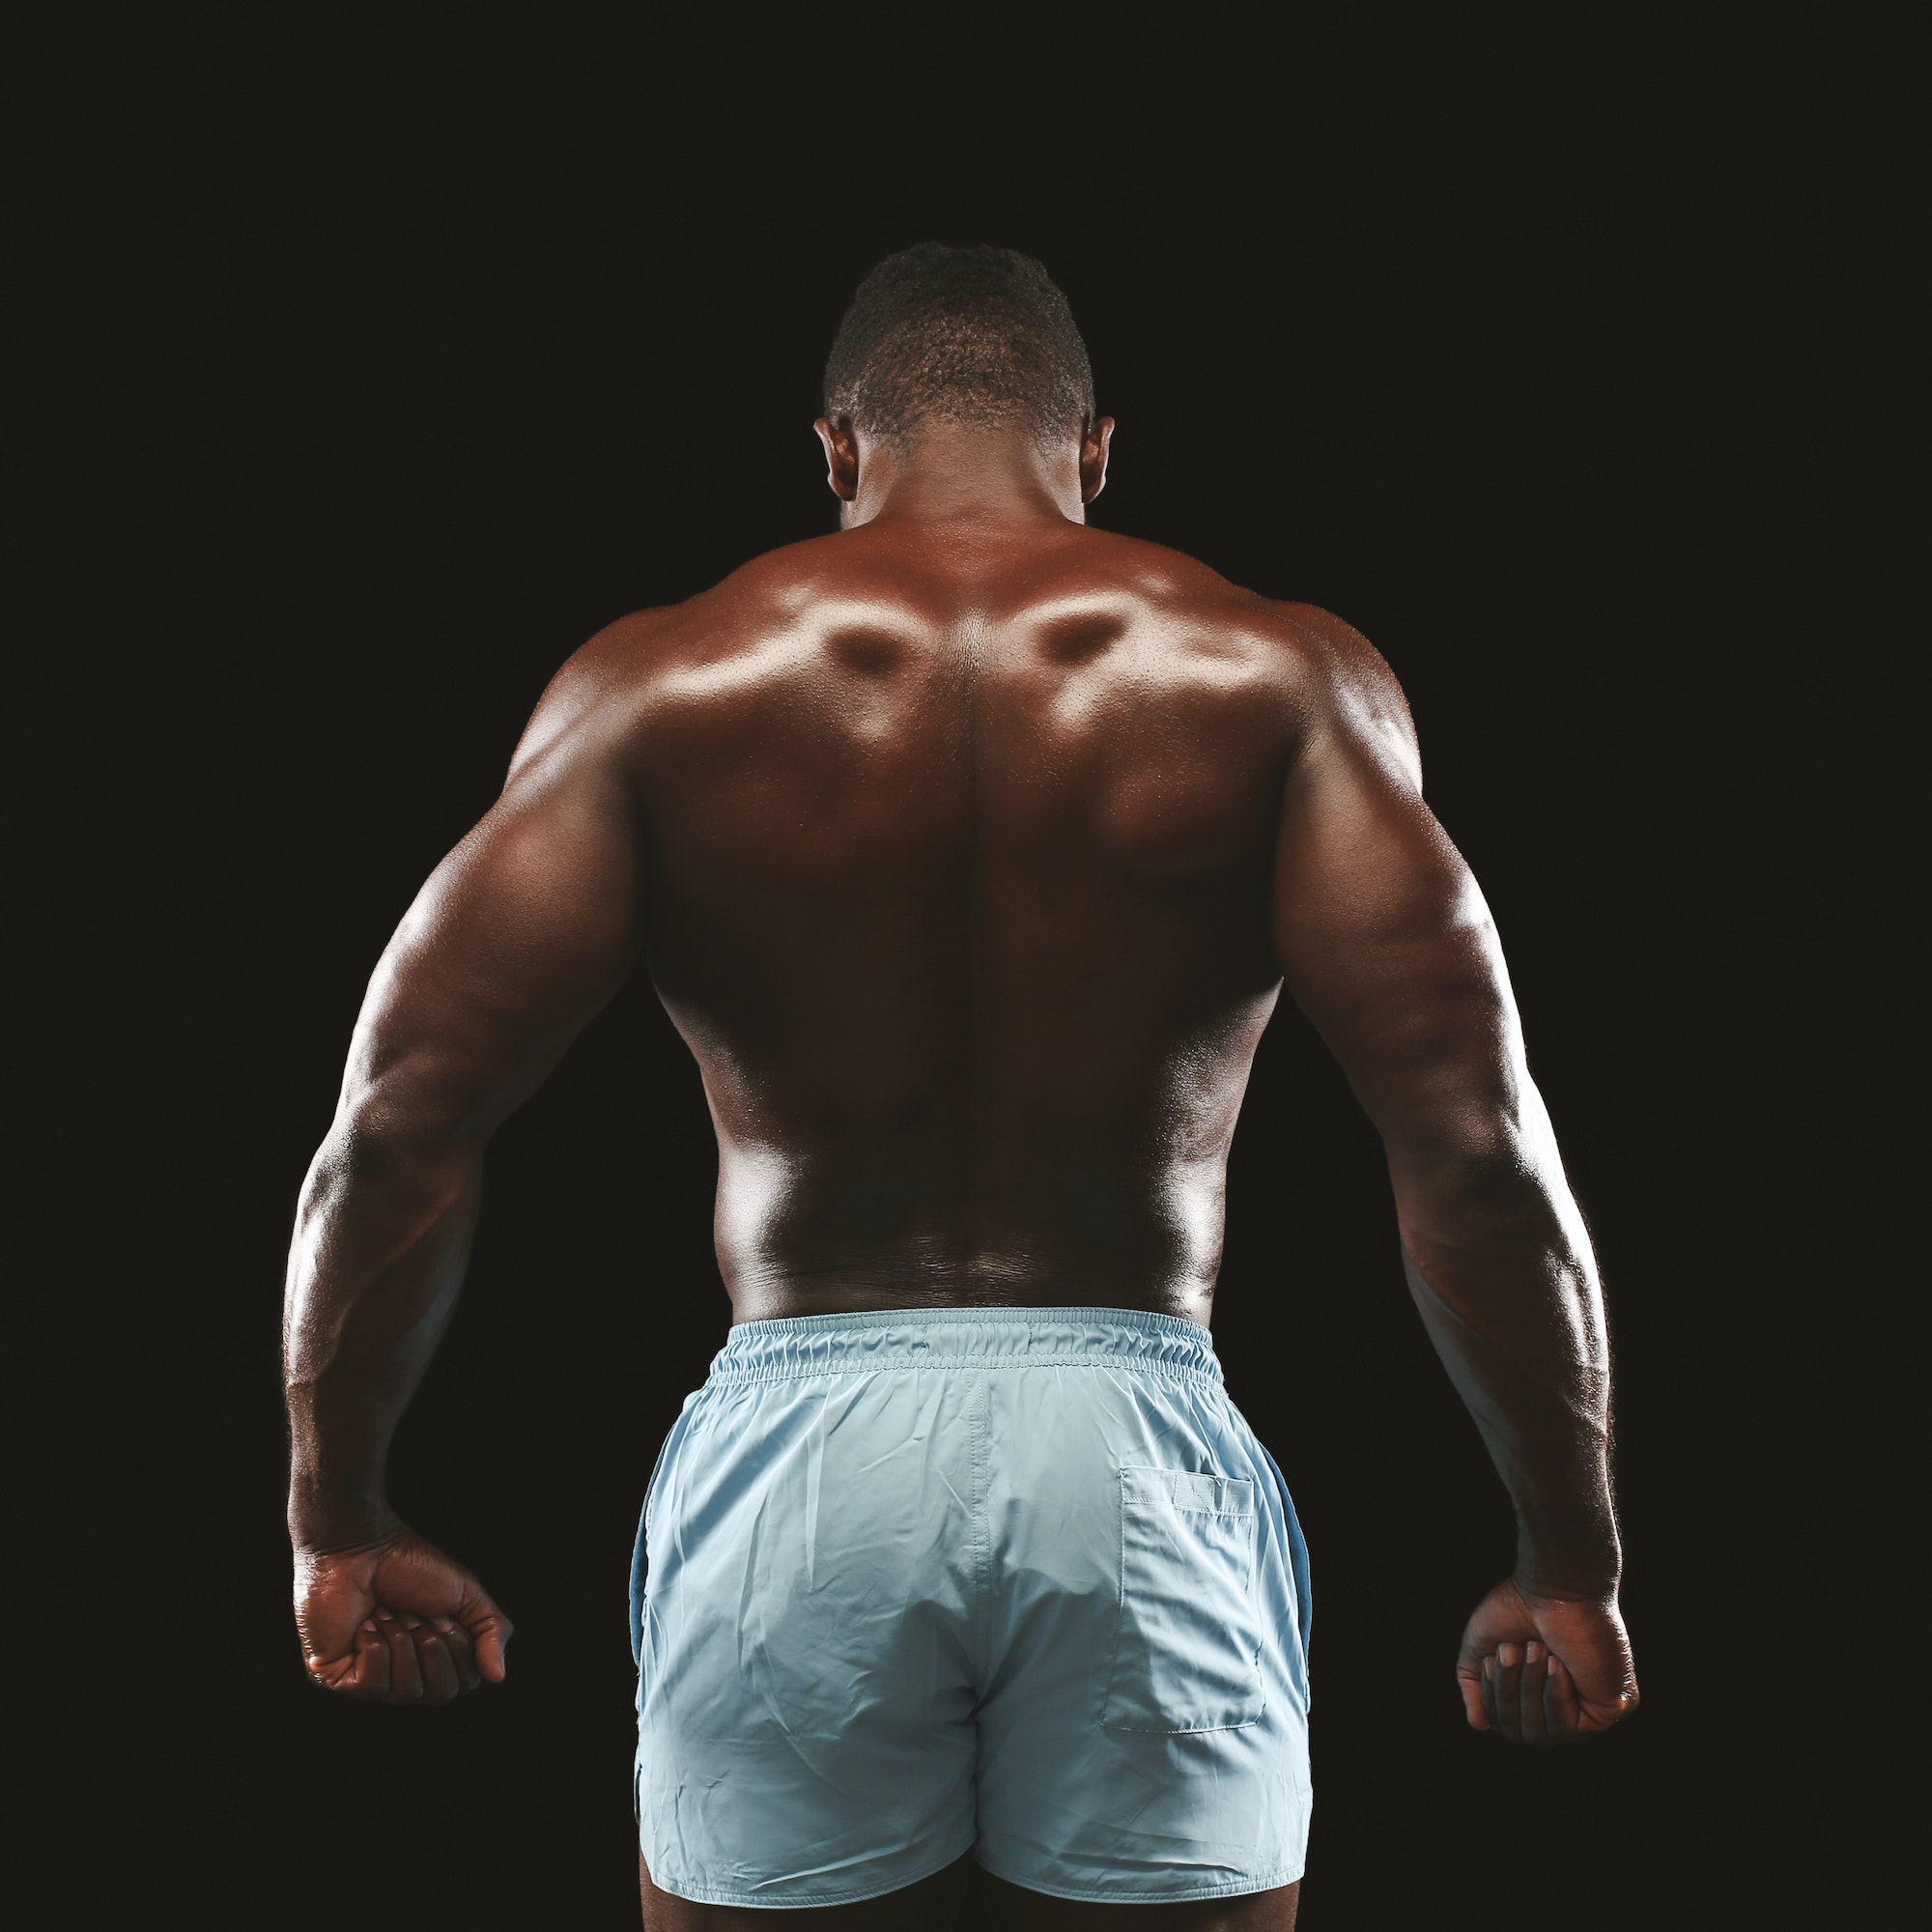 African american sportsman showing strong back muscles